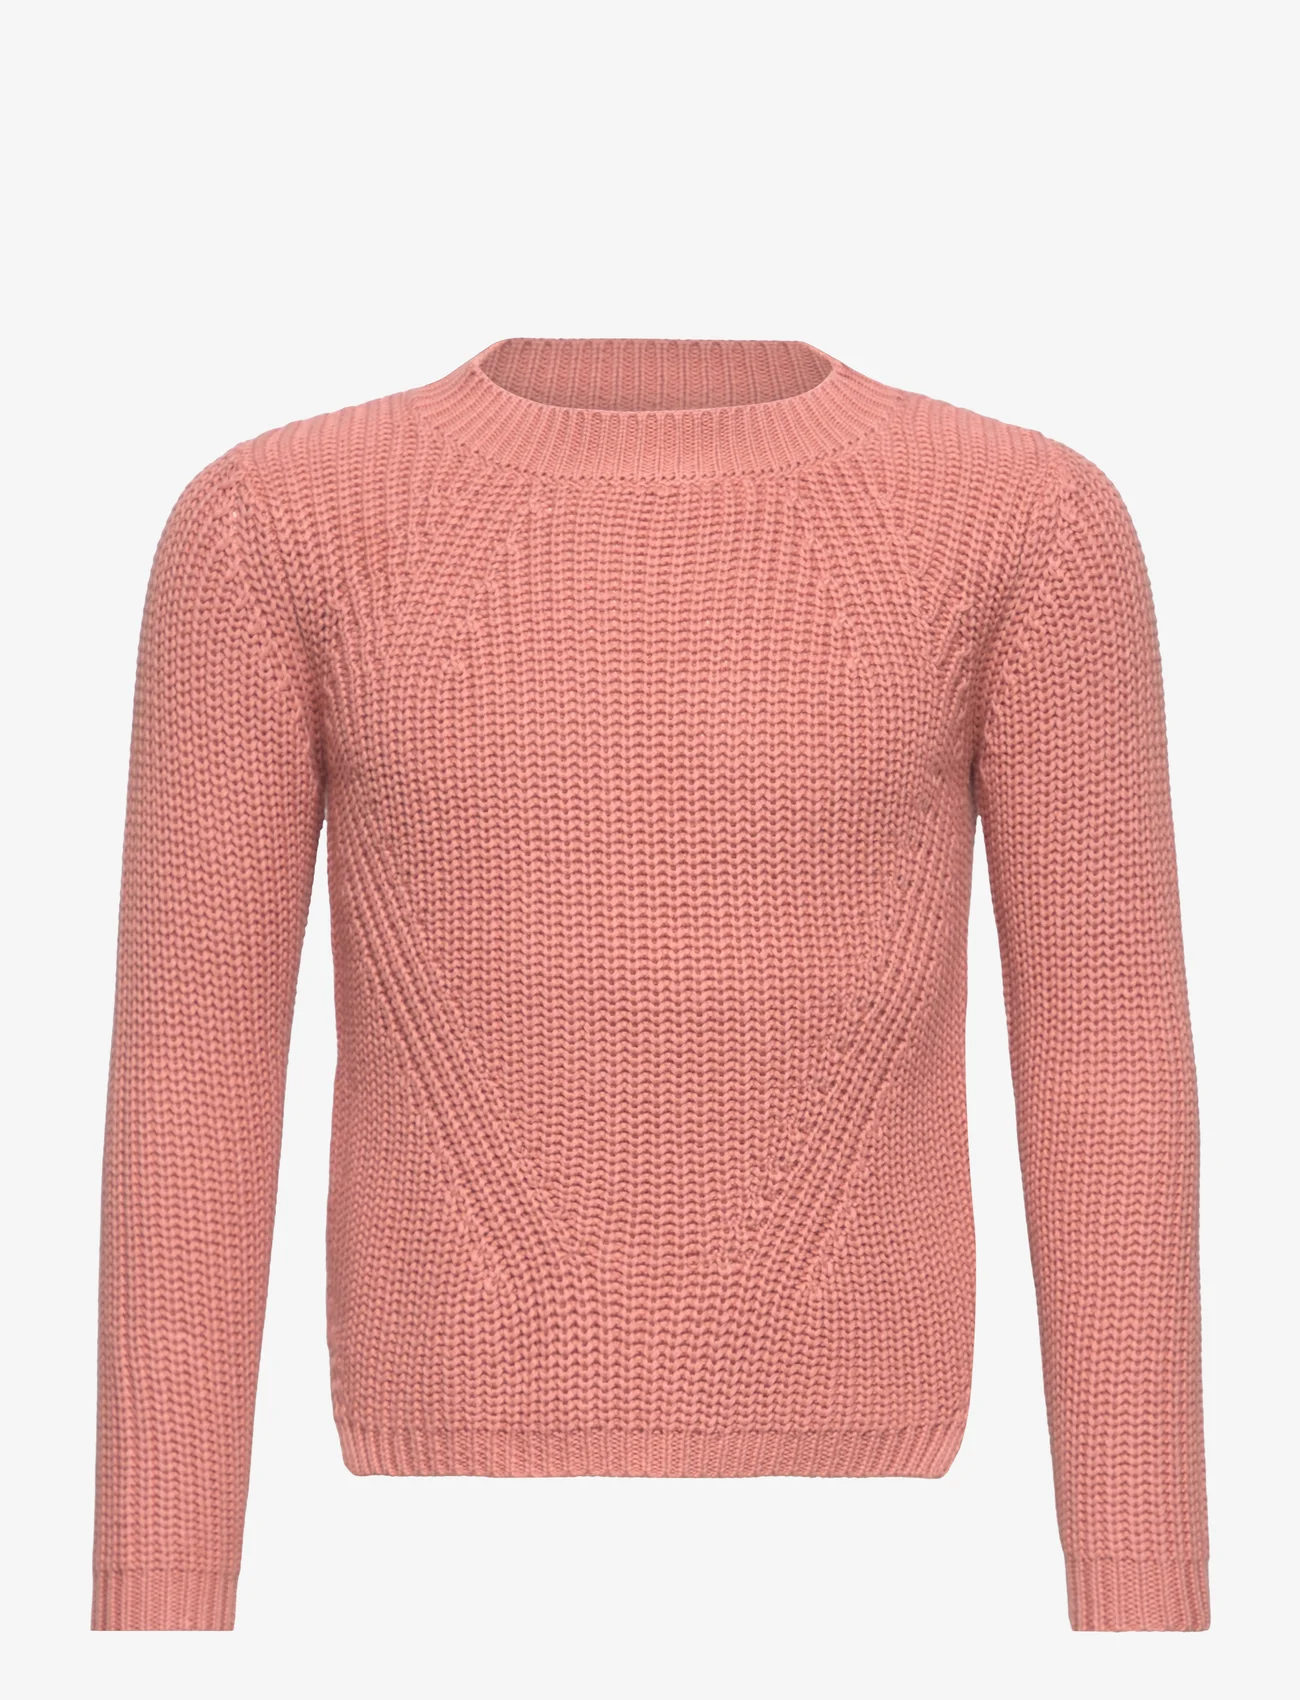 Molo - Gillis - pullover - muted rose - 0